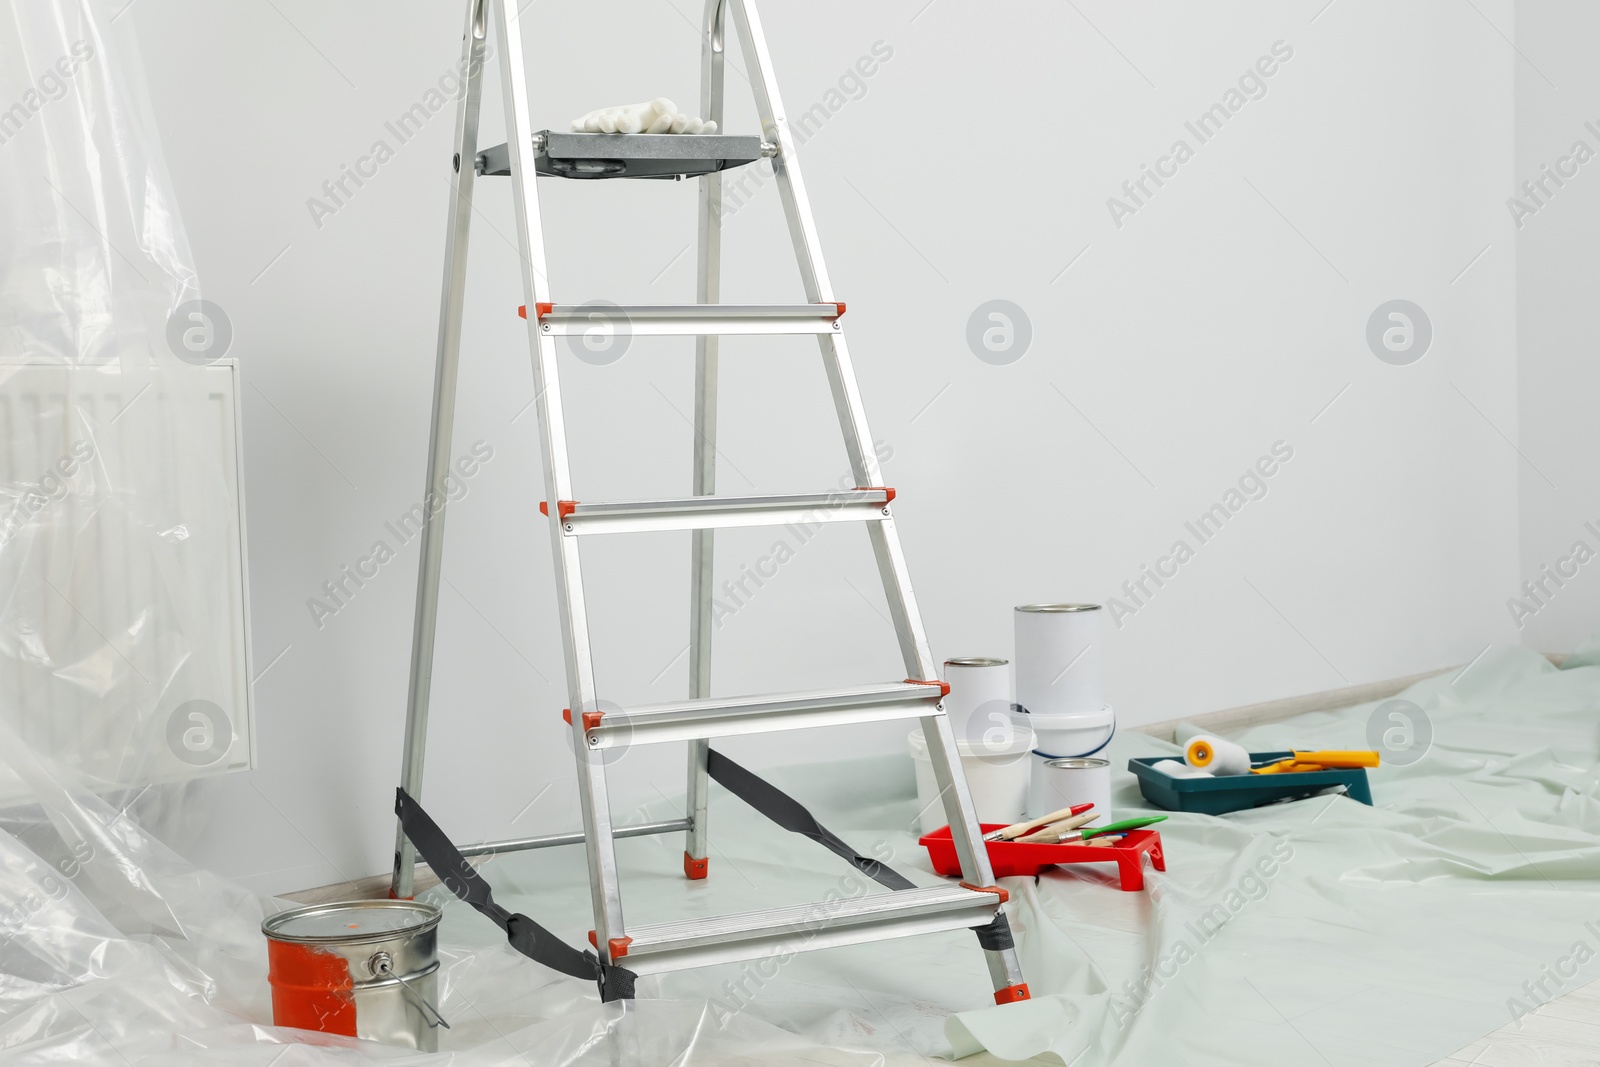 Photo of Metallic folding ladder and painting tools indoors